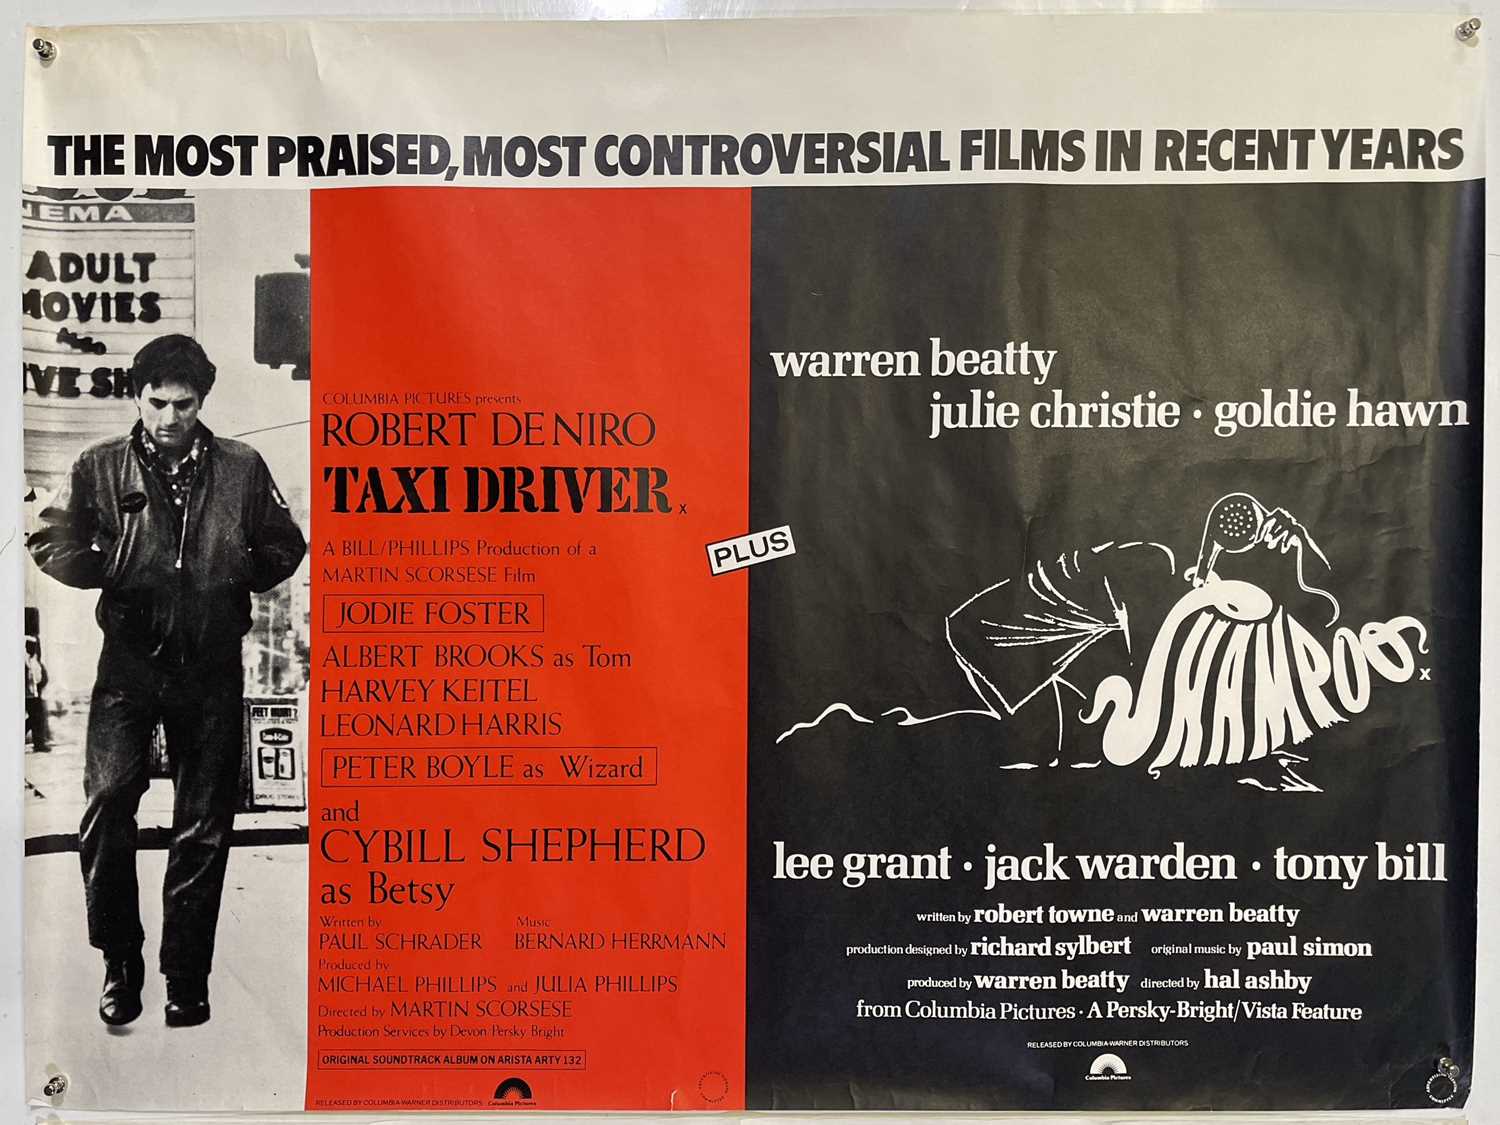 CINEMA POSTERS - ONE FLEW OVER THE CUCKOO'S NEST (1975) / TAXI DRIVER DOUBLE BILL. - Image 2 of 3